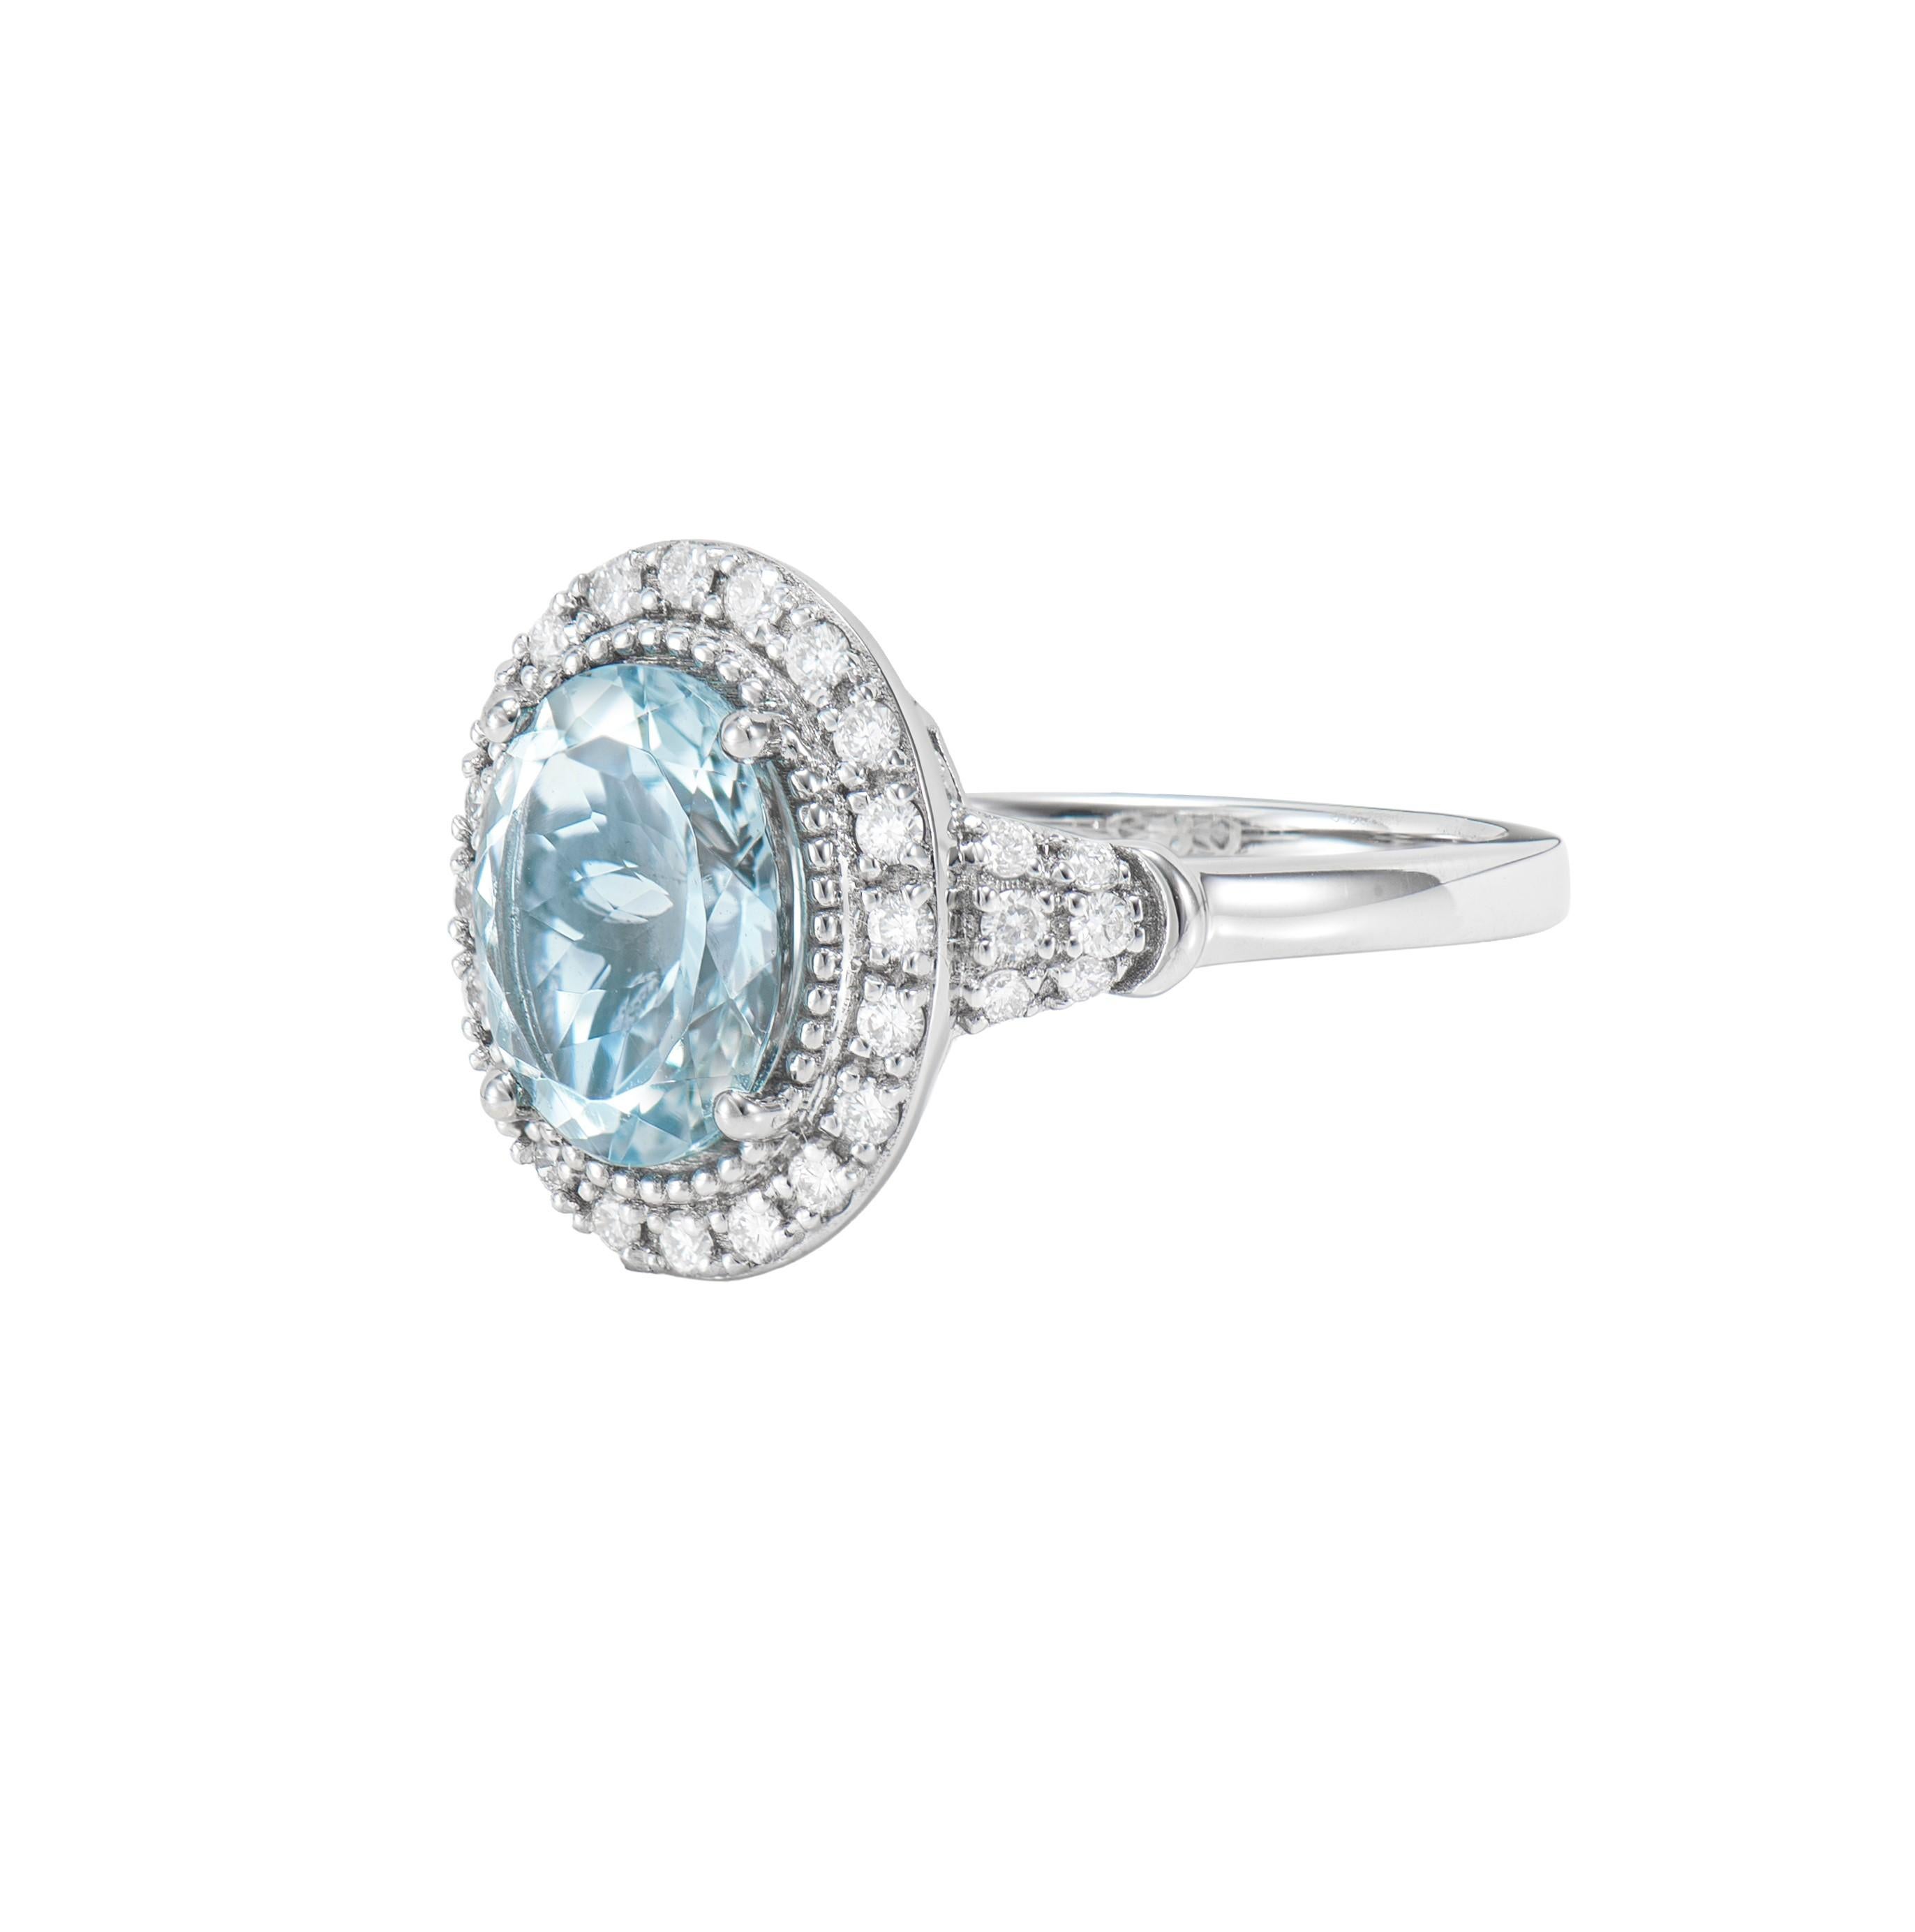 Oval Cut Aquamarine and White Diamond Ring in 18 Karat White Gold. For Sale